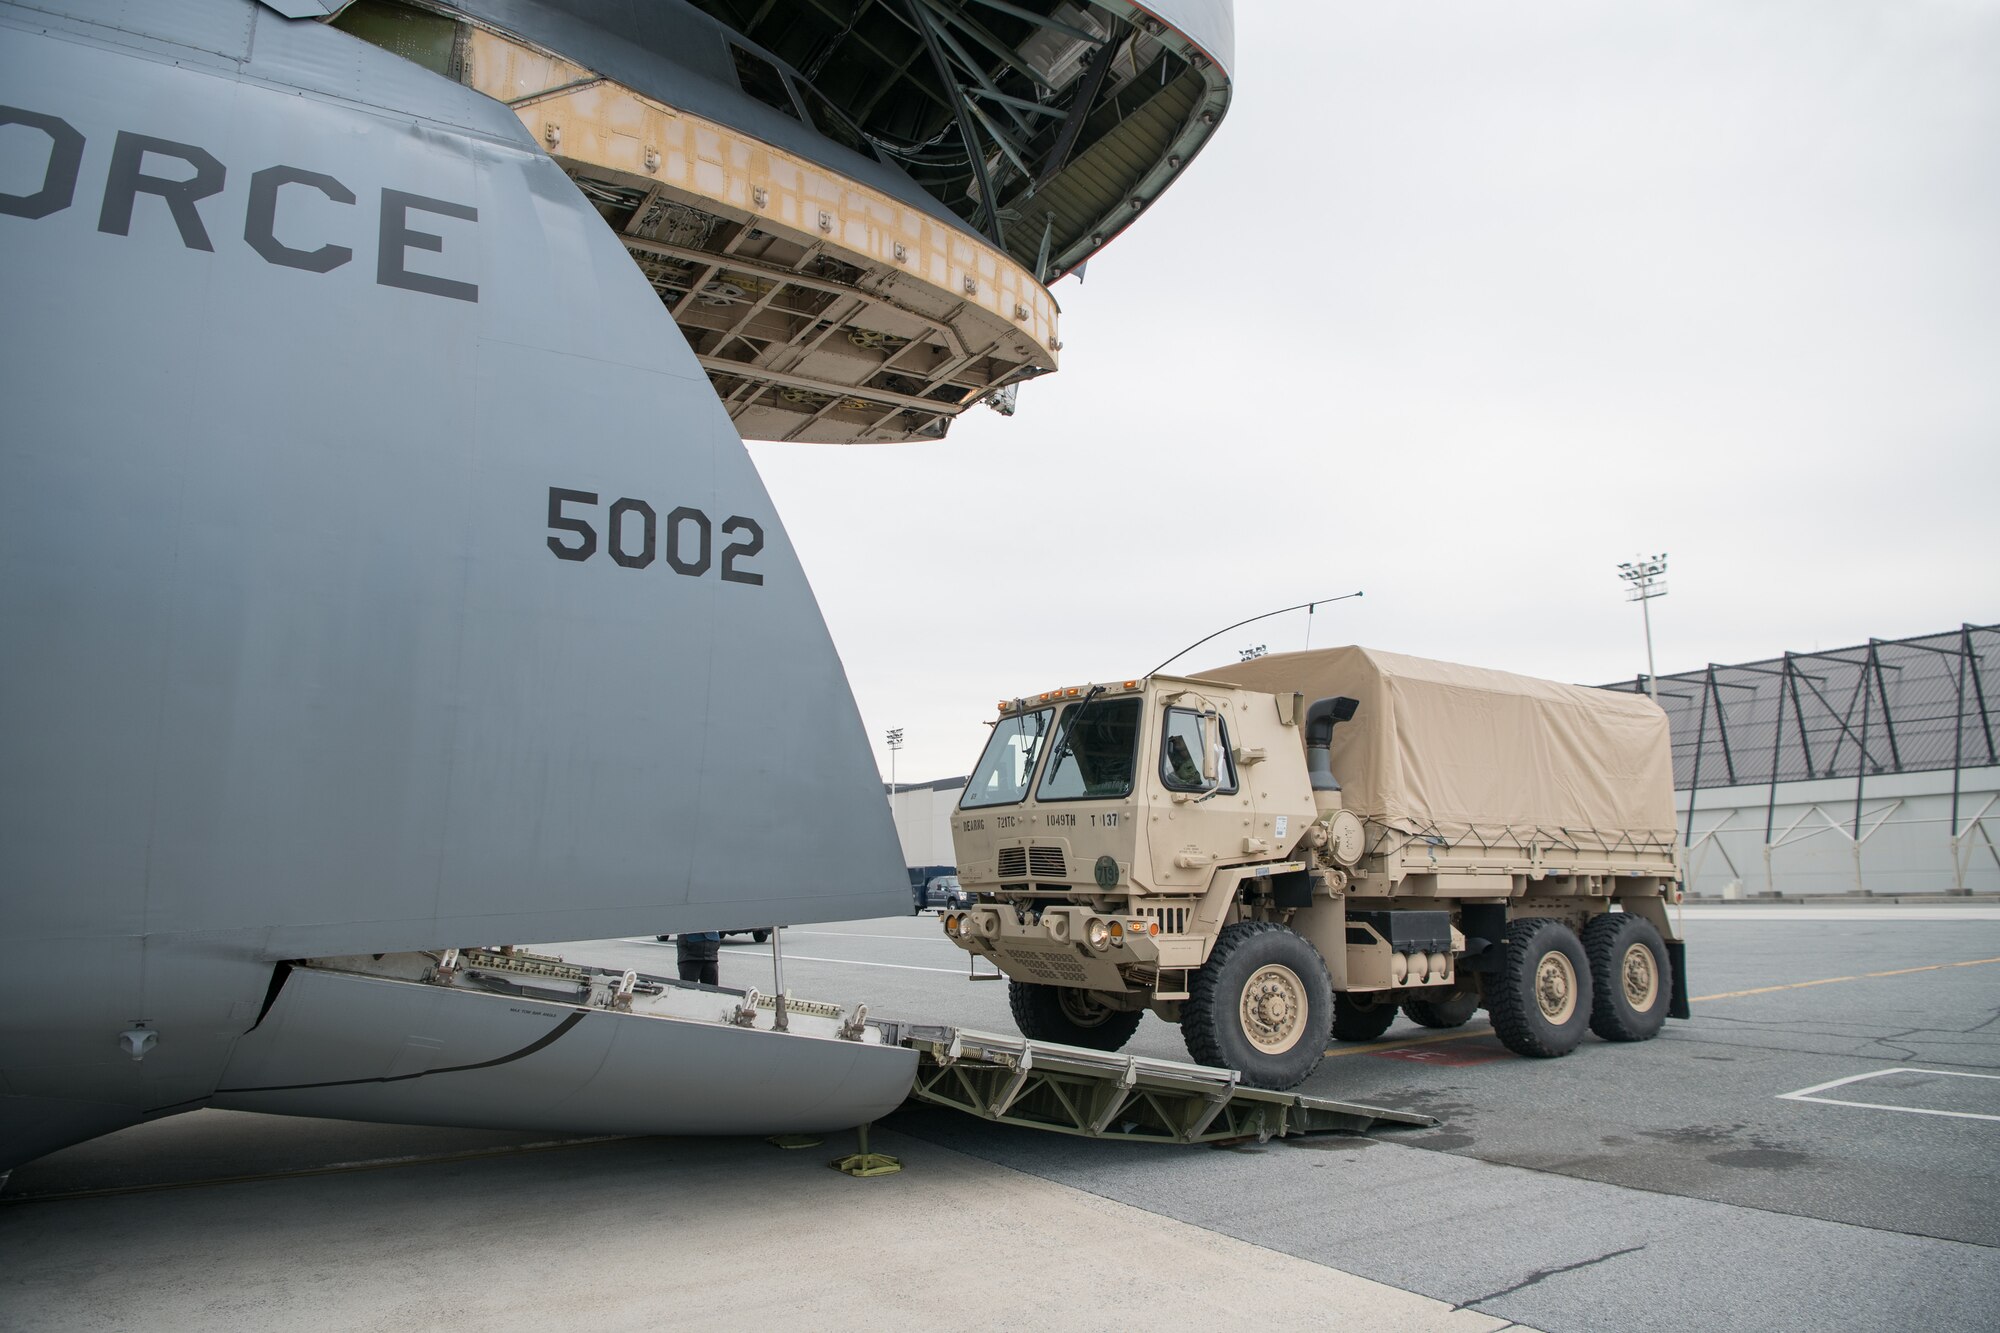 Vehicles from the 72nd Troop Command in New Castle, Del., are loaded onto a C-5M Super Galaxy during the Dover Operational Readiness for a Multi-domain Agile Response Exercise Nov. 14, 2019, at Dover Air Force Base, Del. The exercise included a simulated mass troop deployment to aid citizens following a natural disaster. (U.S. Air Force photo by Mauricio Campino)